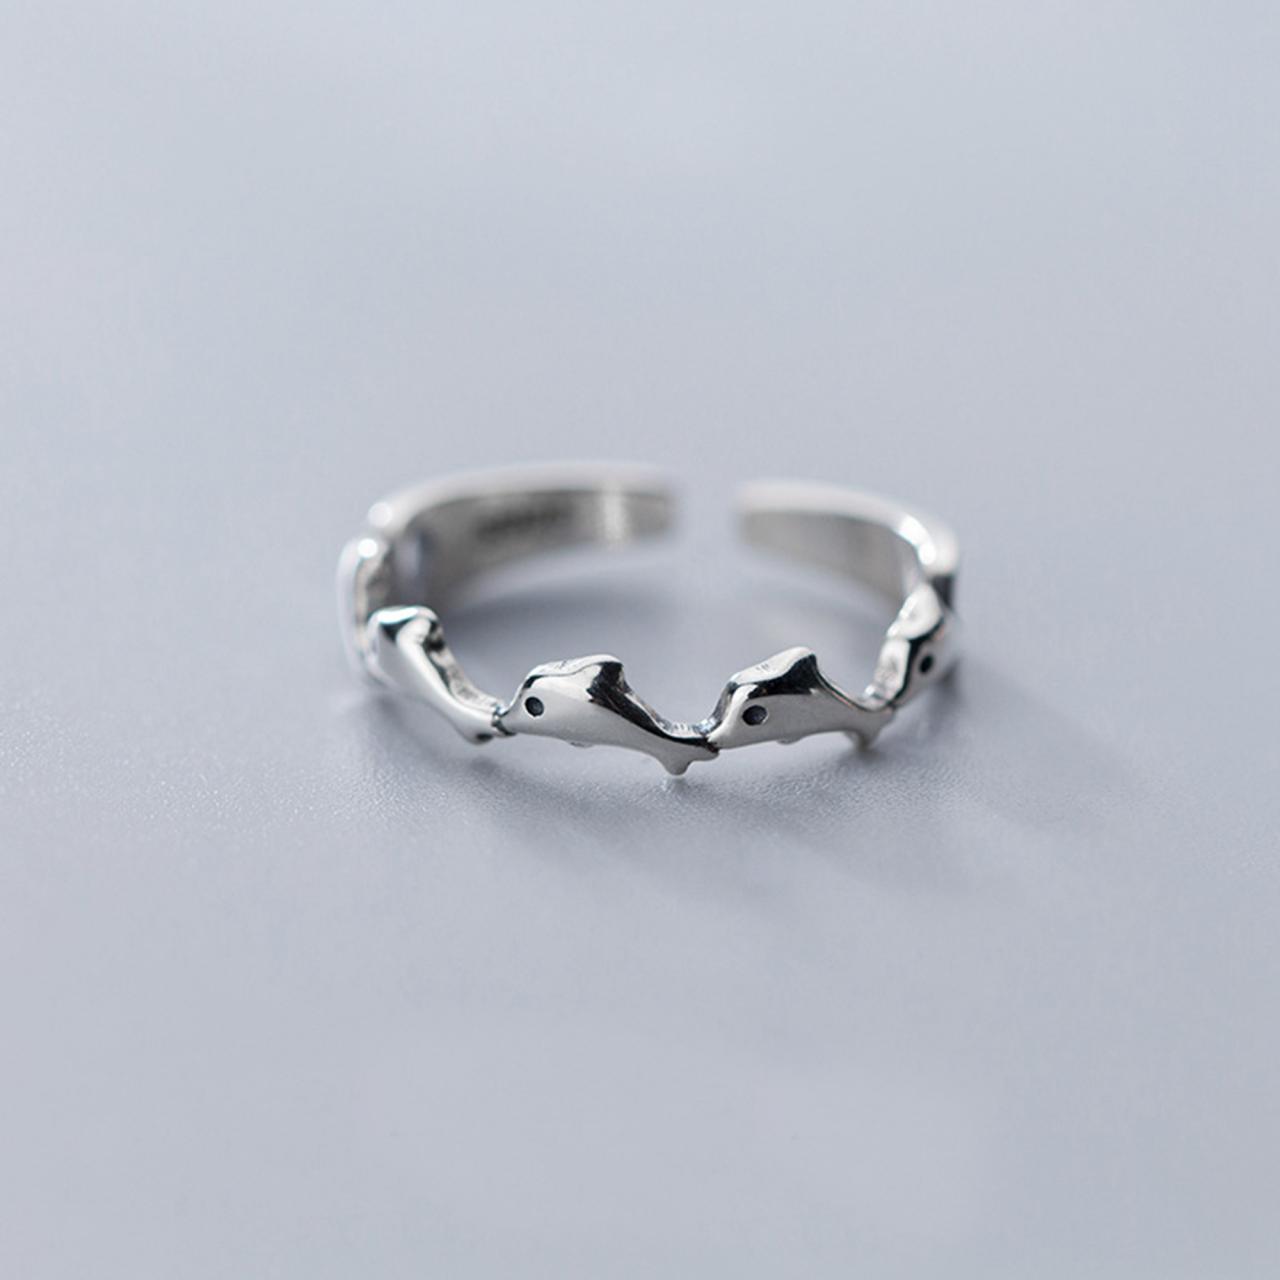 Glossy Opened Whale Ring, Sterling Silver Adjustable Whale Ring, Minimalist Rings, Dainty Ring, Women Ring, Everyday Jewelry